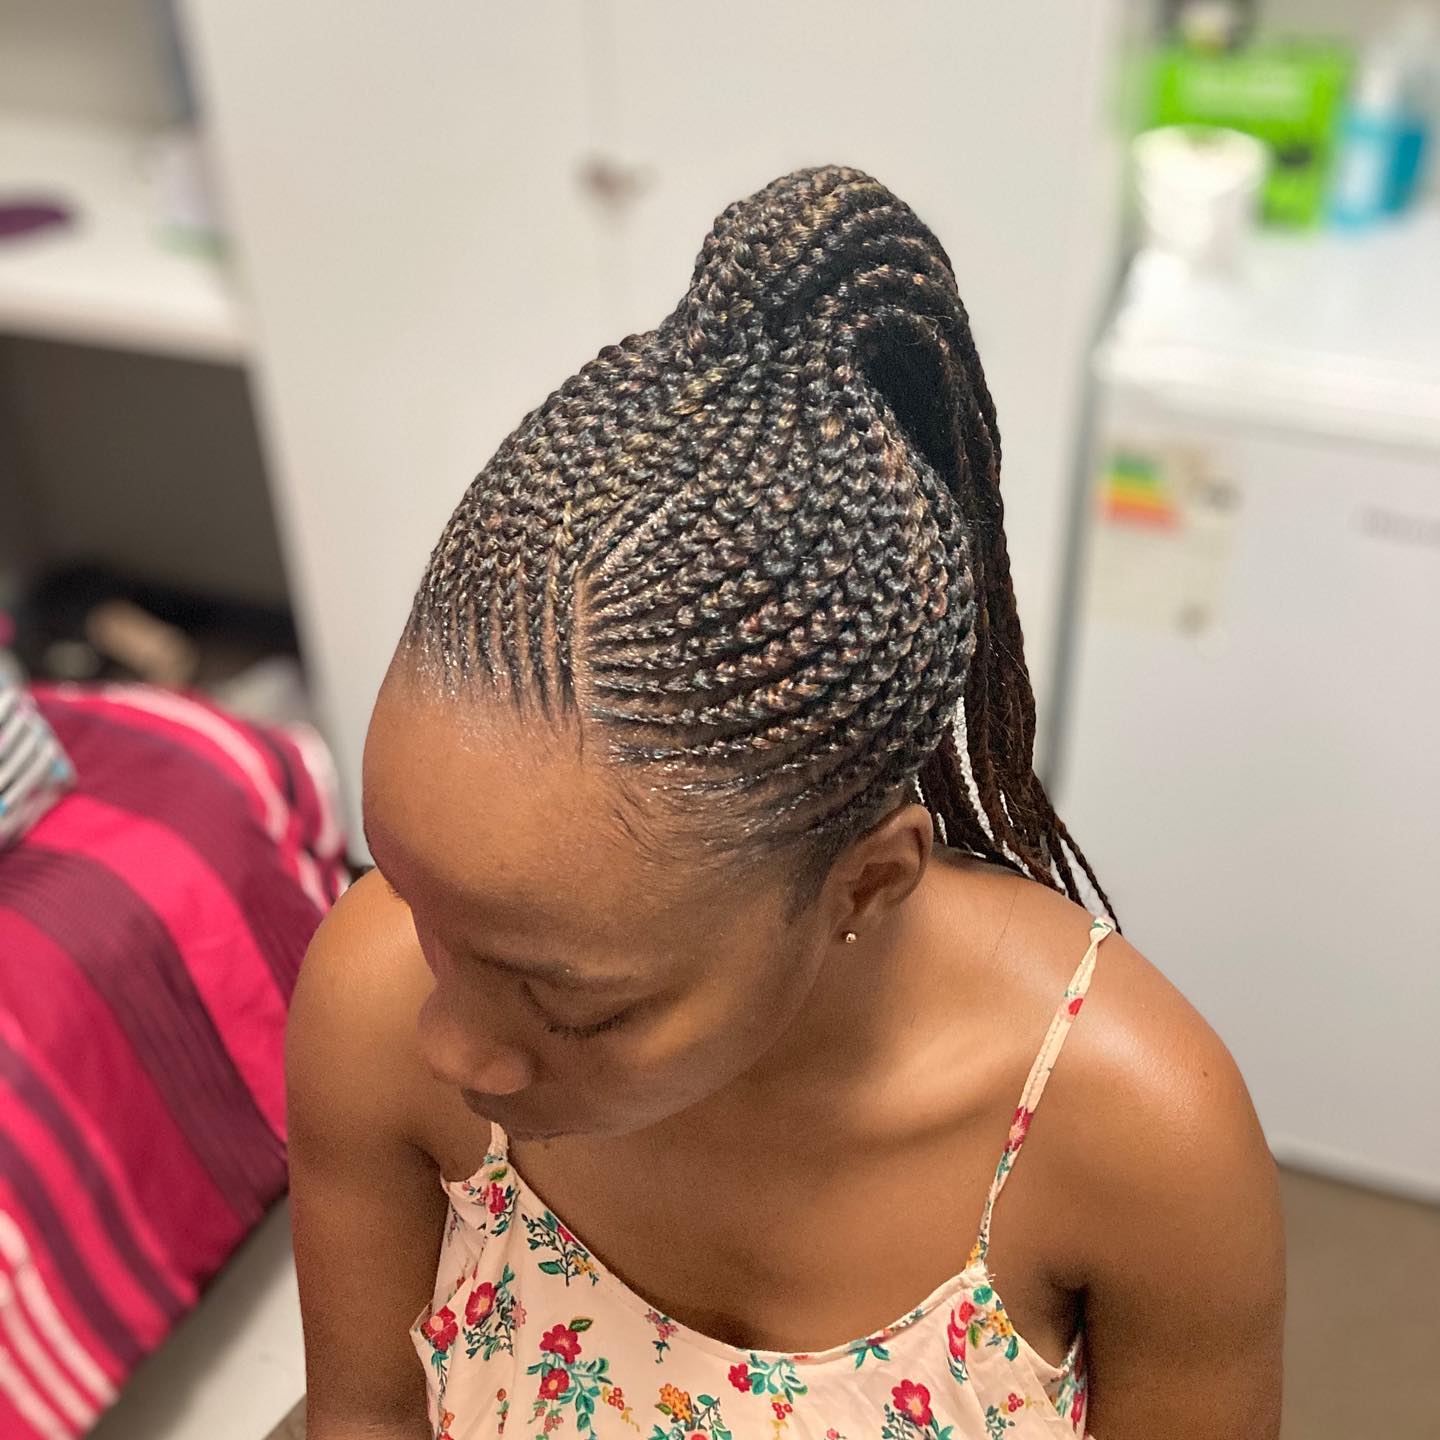 Updo Hairstyle for Black women 3 Black hair updo styles pictures | Black updo hairstyles with curls | black woman braids Updo Hairstyles for Black Women